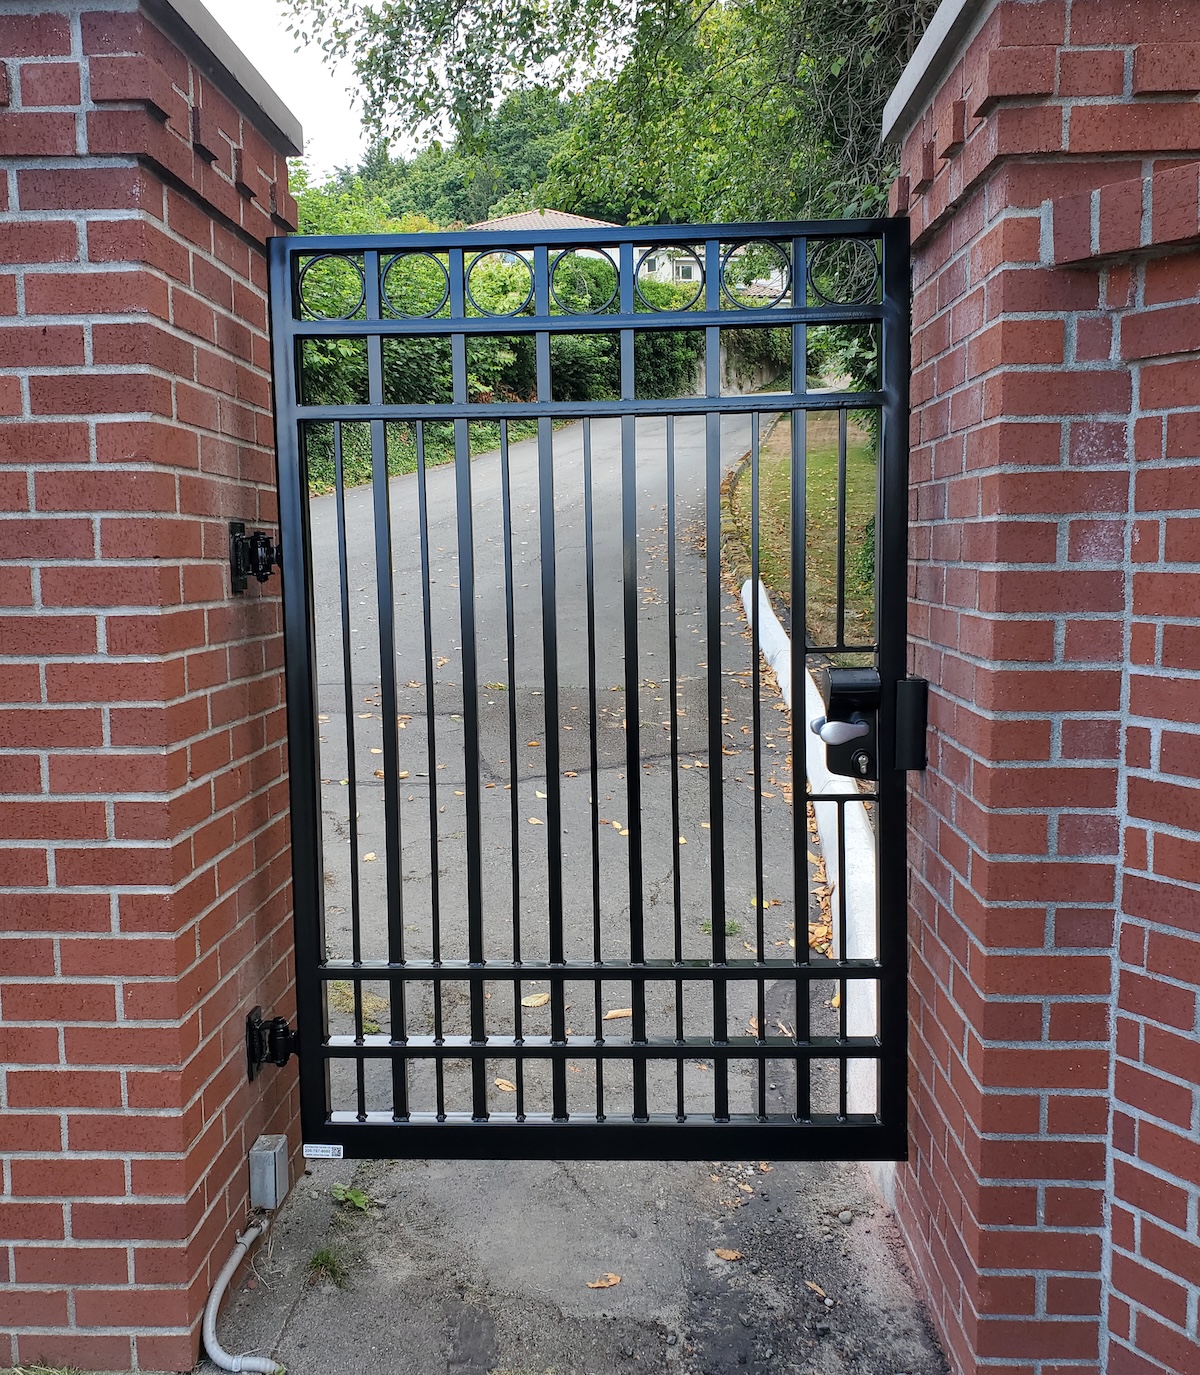 A Locked Pedestrian Gate Creates A Secure Walkway For Visitors Entering A Property On Foot